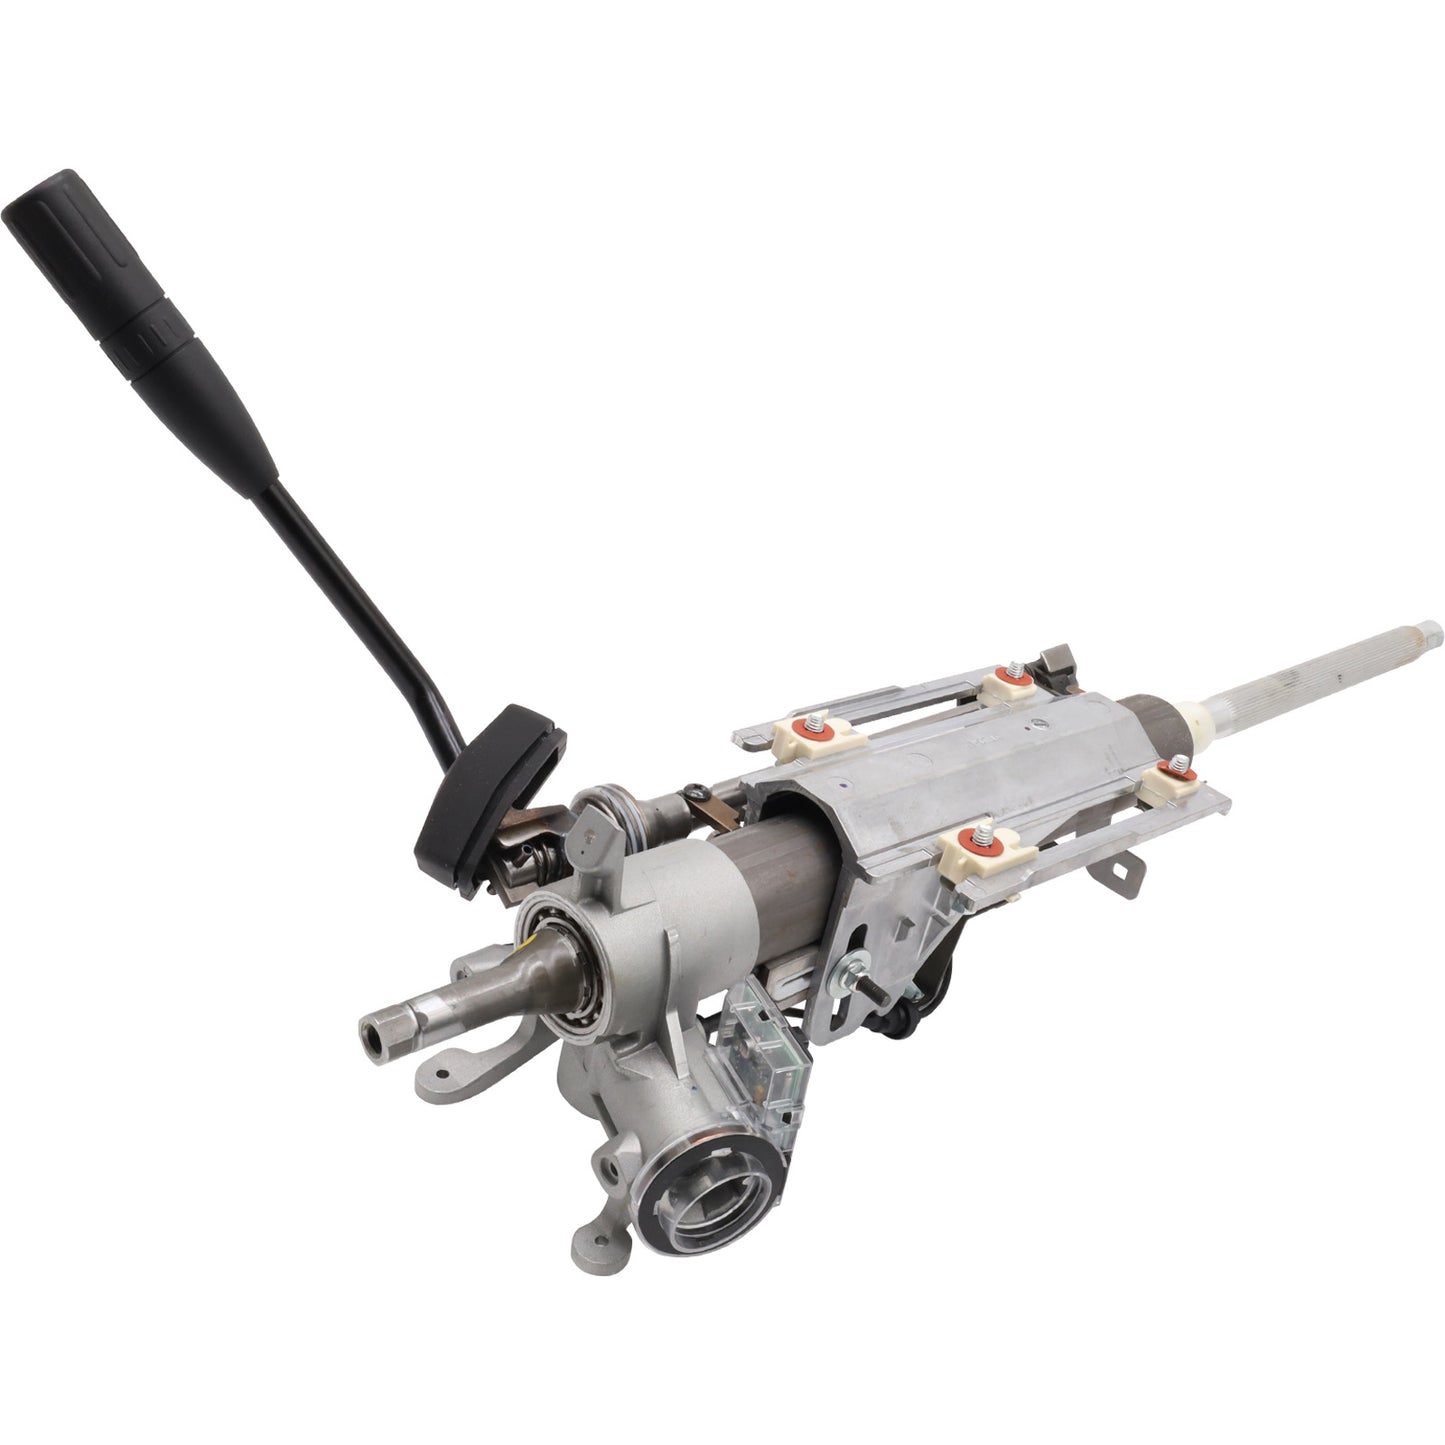 Reconditioned Steering Column fits Ford Falcon FG - Column Shift Type